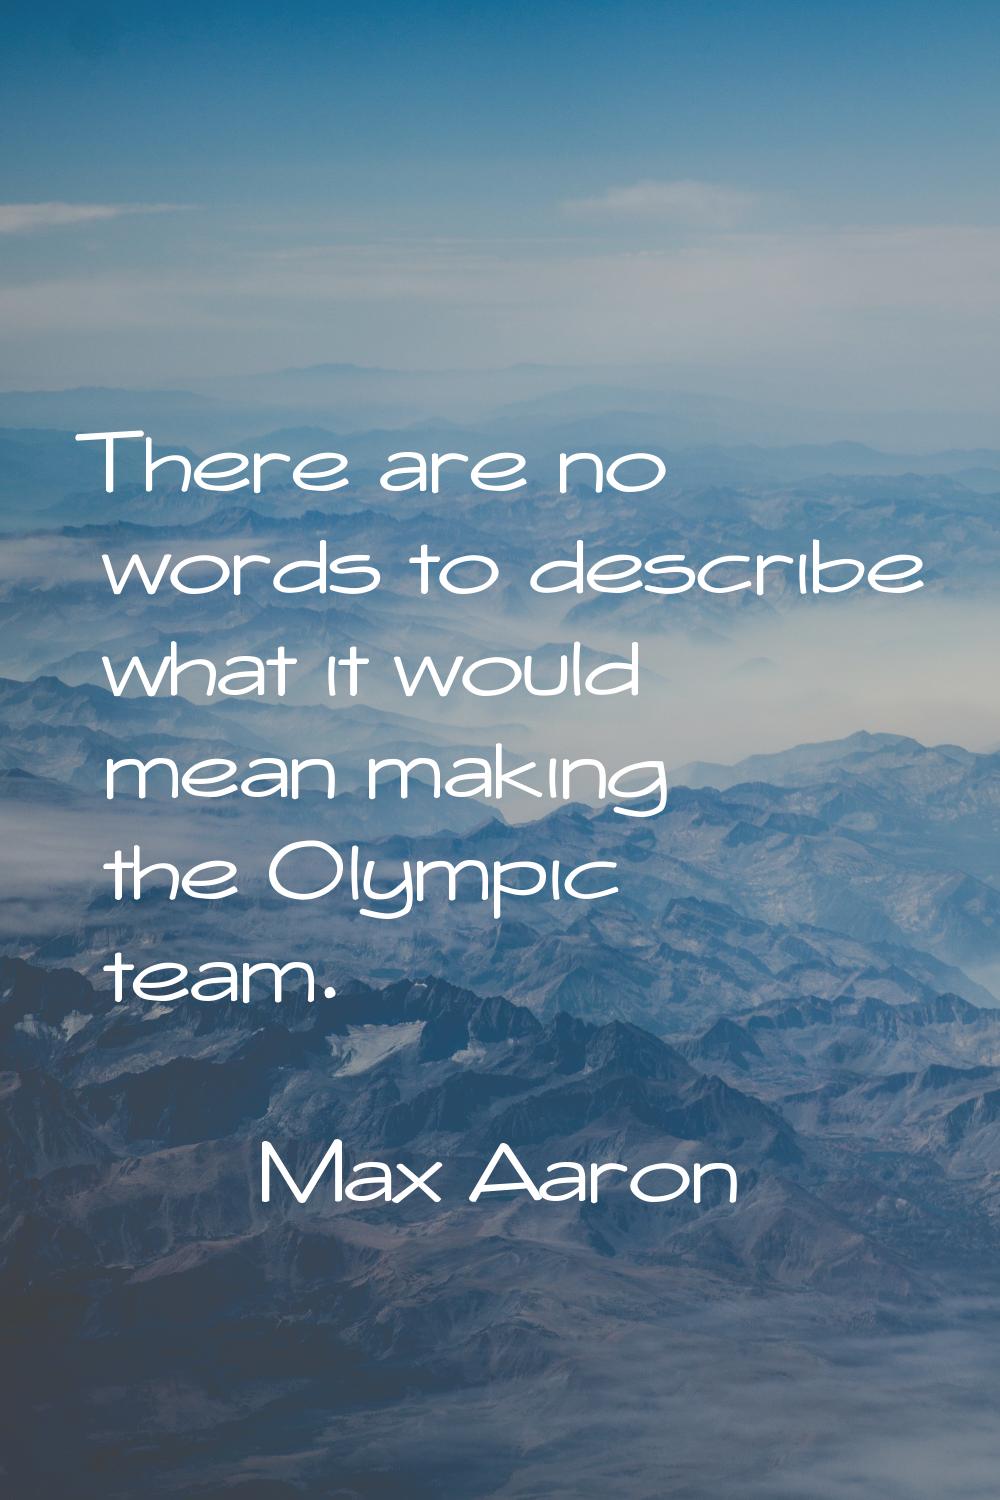 There are no words to describe what it would mean making the Olympic team.